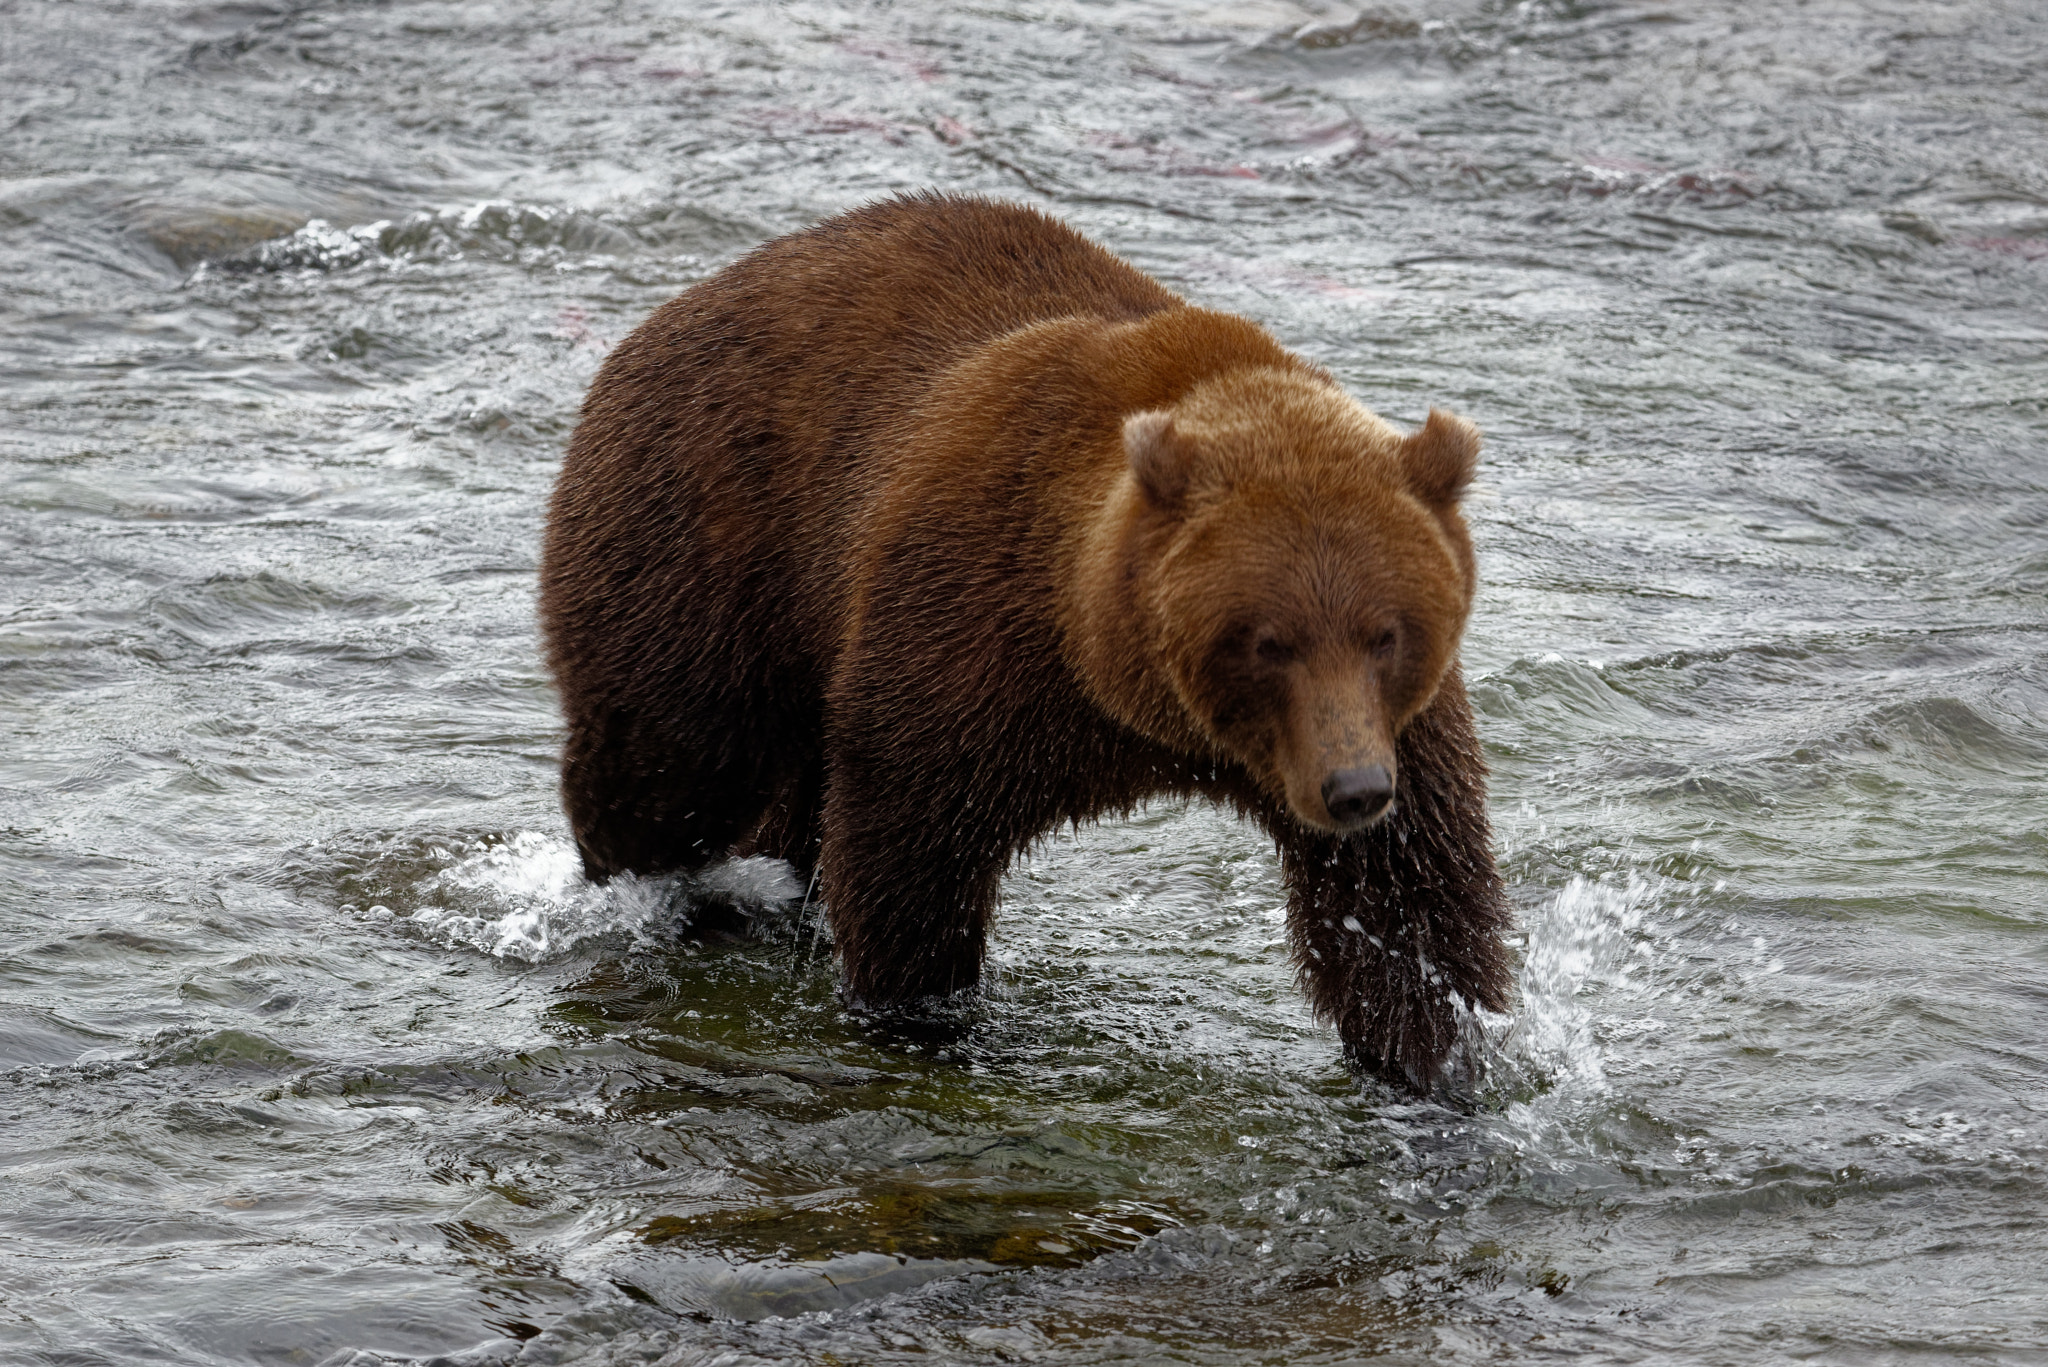 A New Story of Adventure Started in Katmai National Park